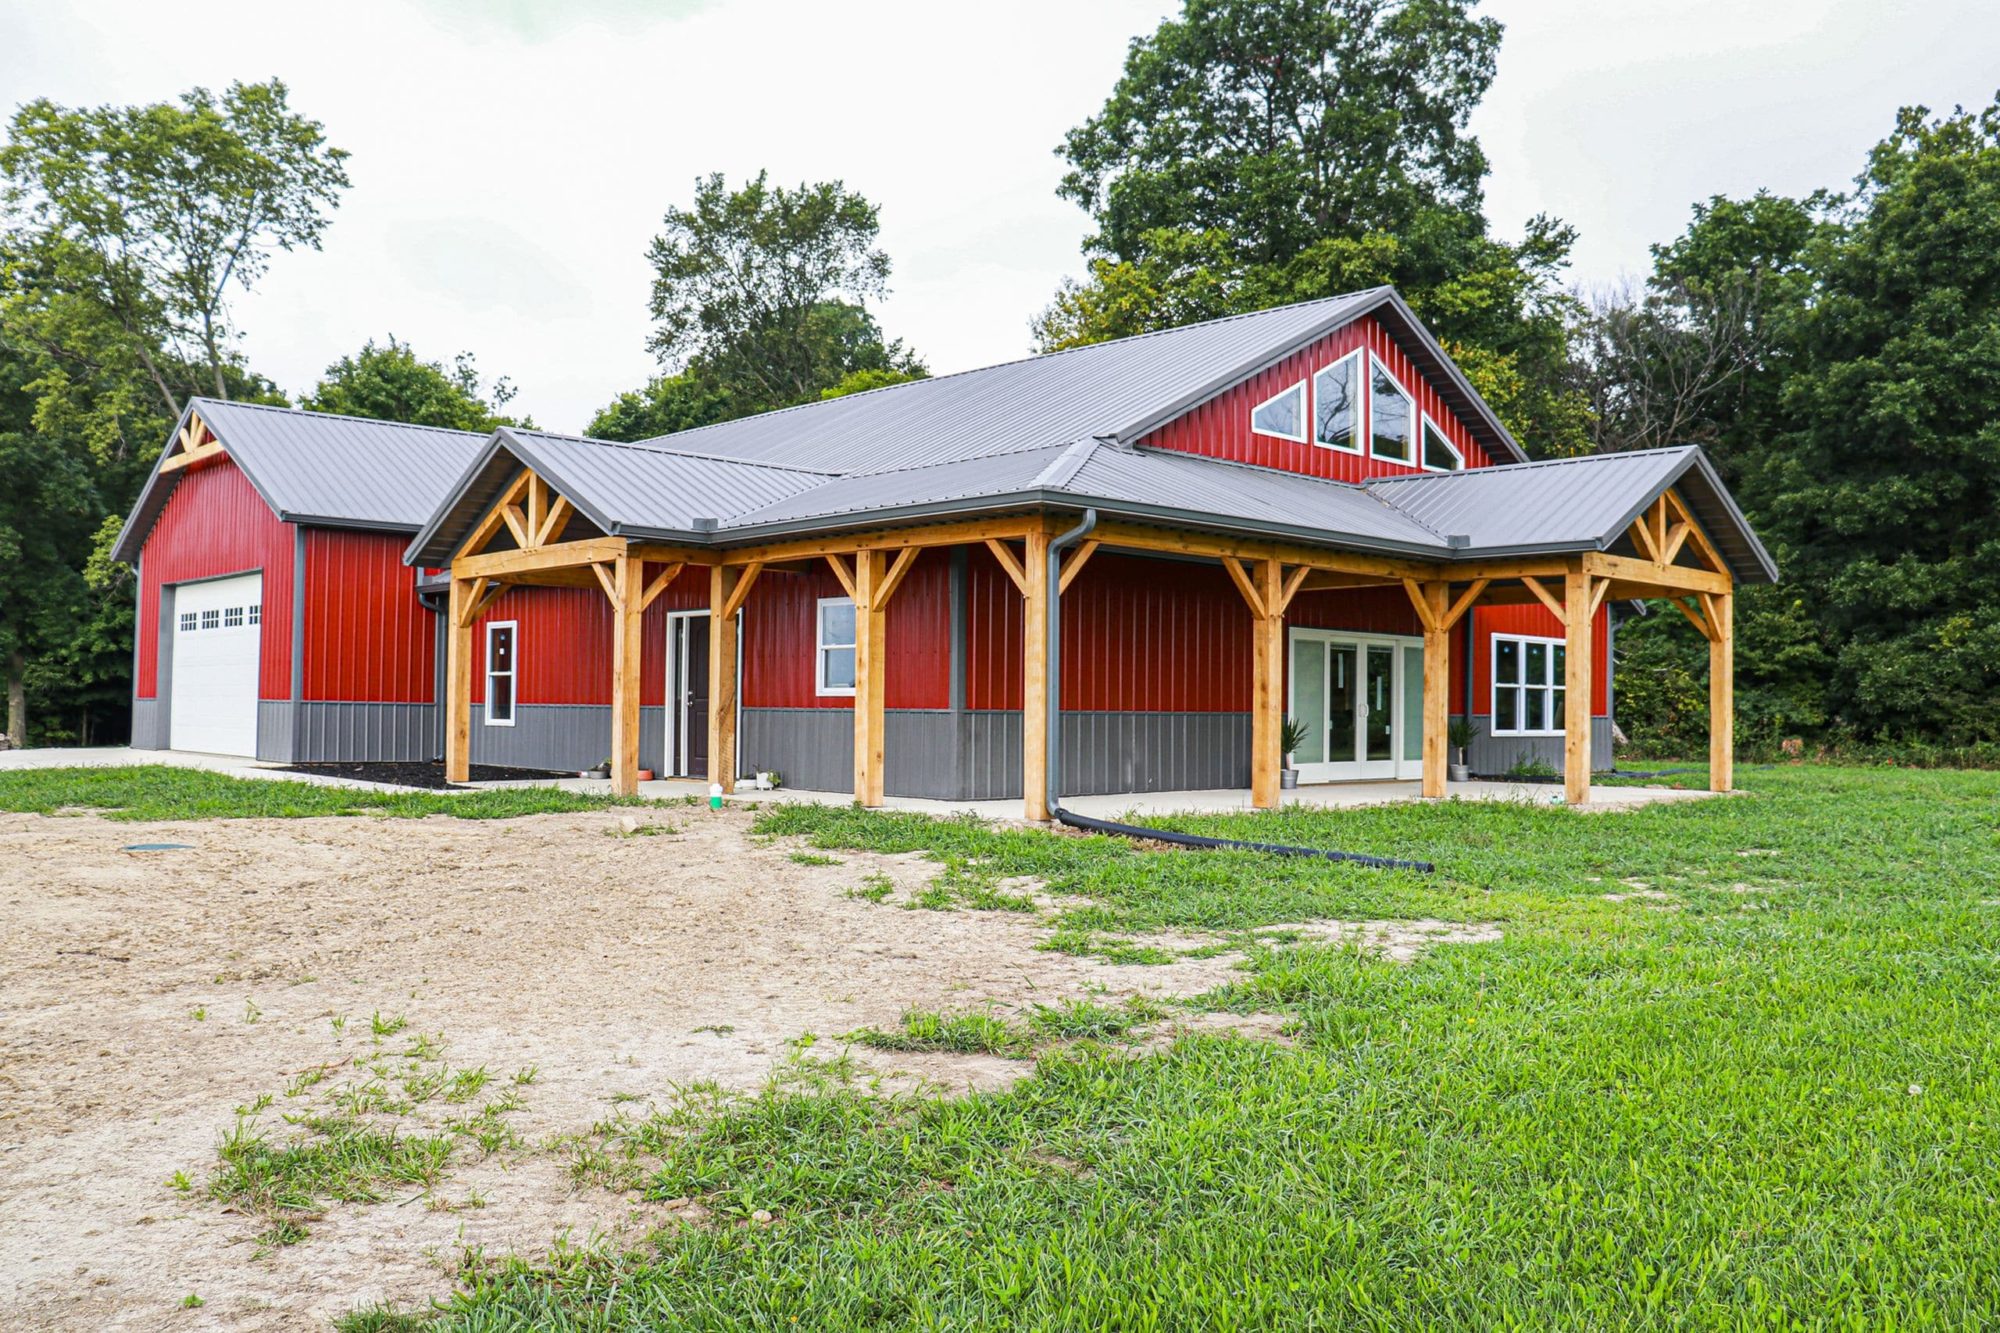 A red pole barn house with wrap around porch and decorative wood beams